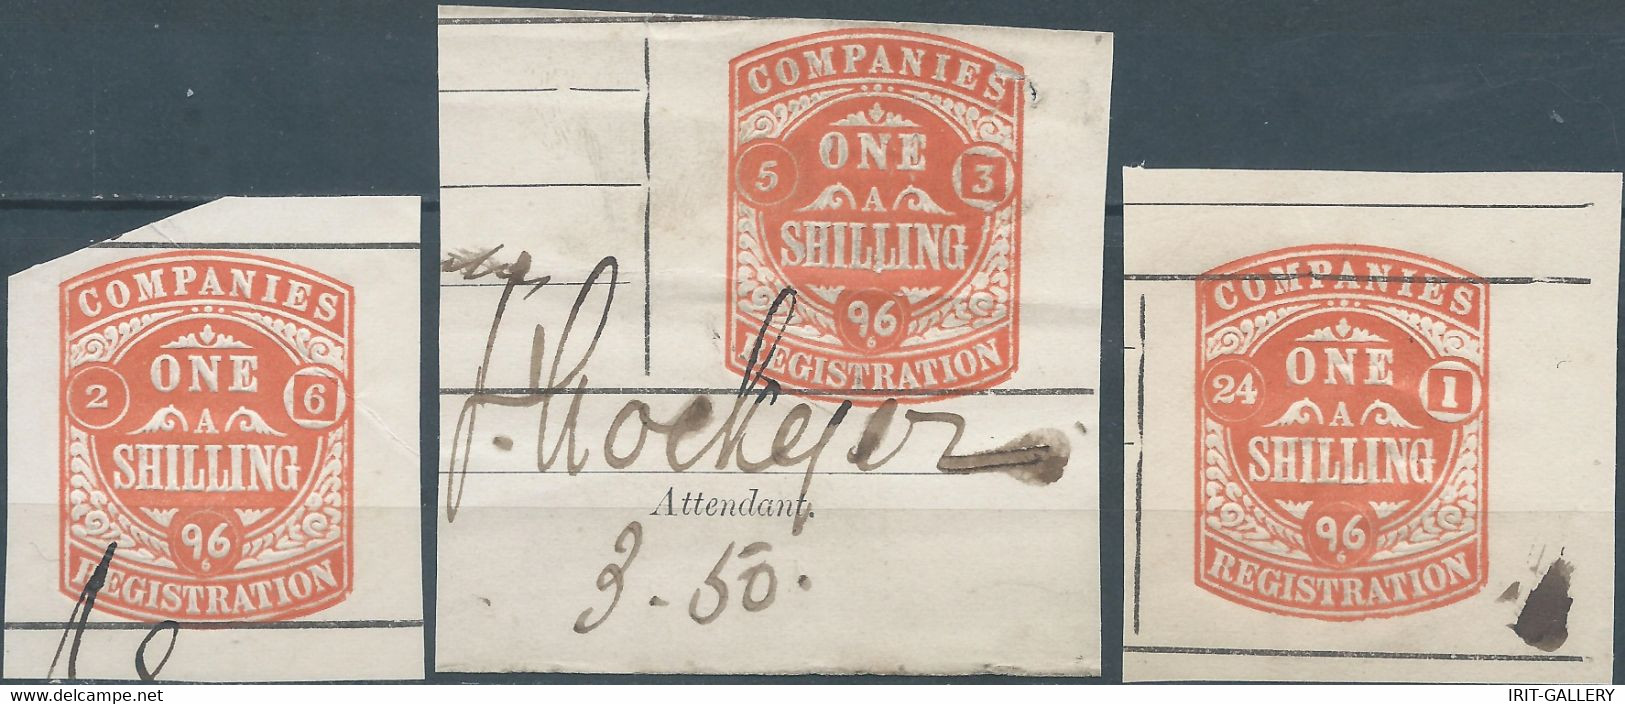 Great Britain-ENGLAND,1896 Tax Fee,COMPANIES REGISTRATION 1 SHILLING - Fiscali